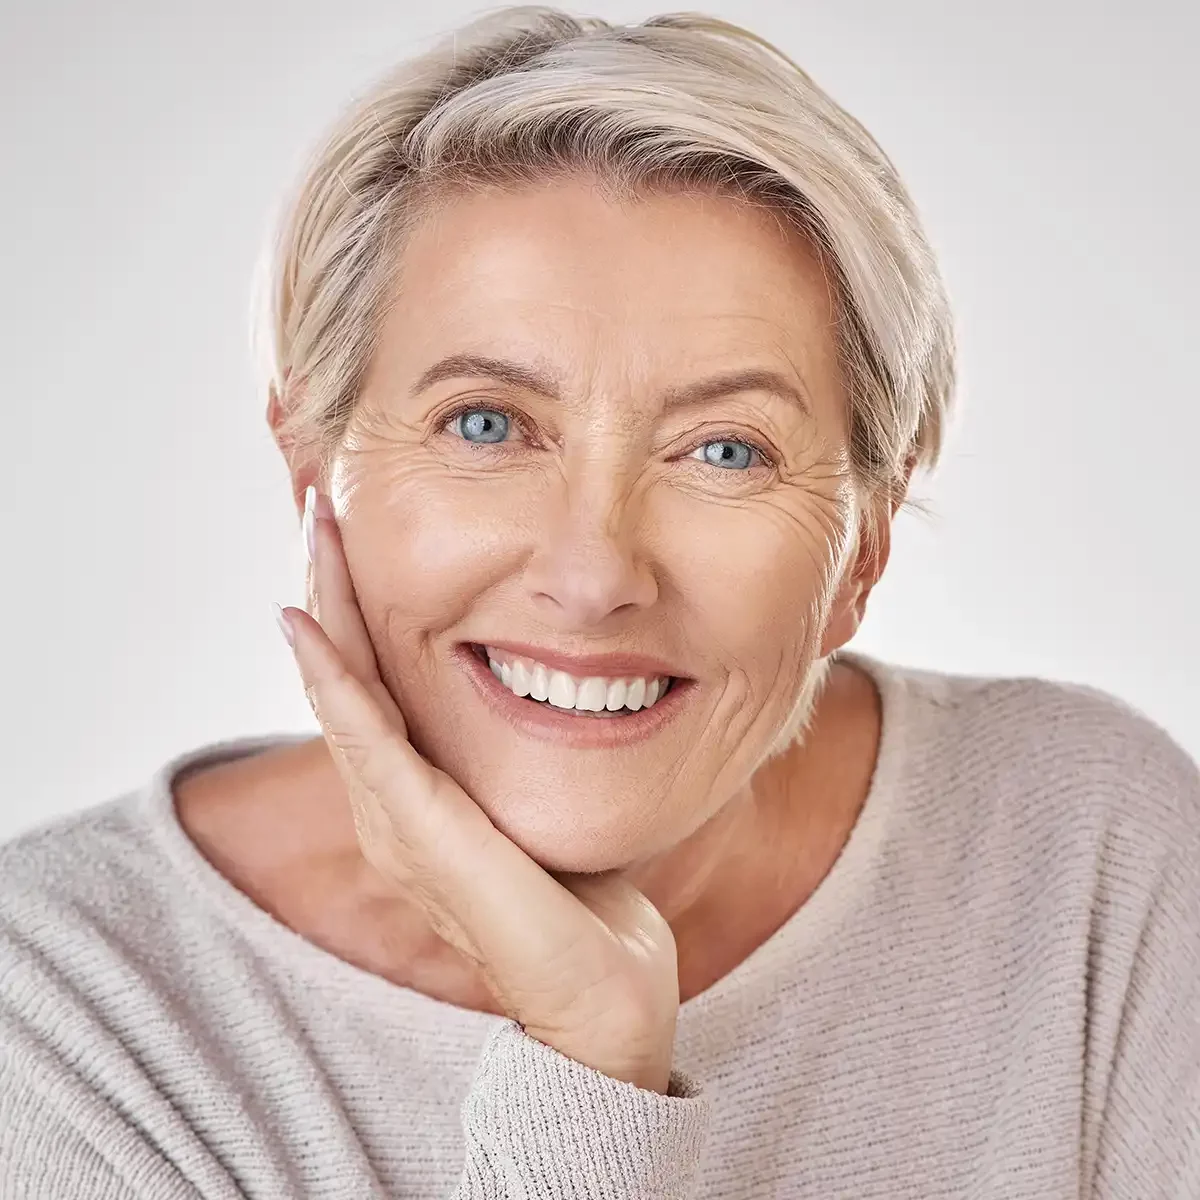 Woman with short hair smiling after All-on-4 dental implants